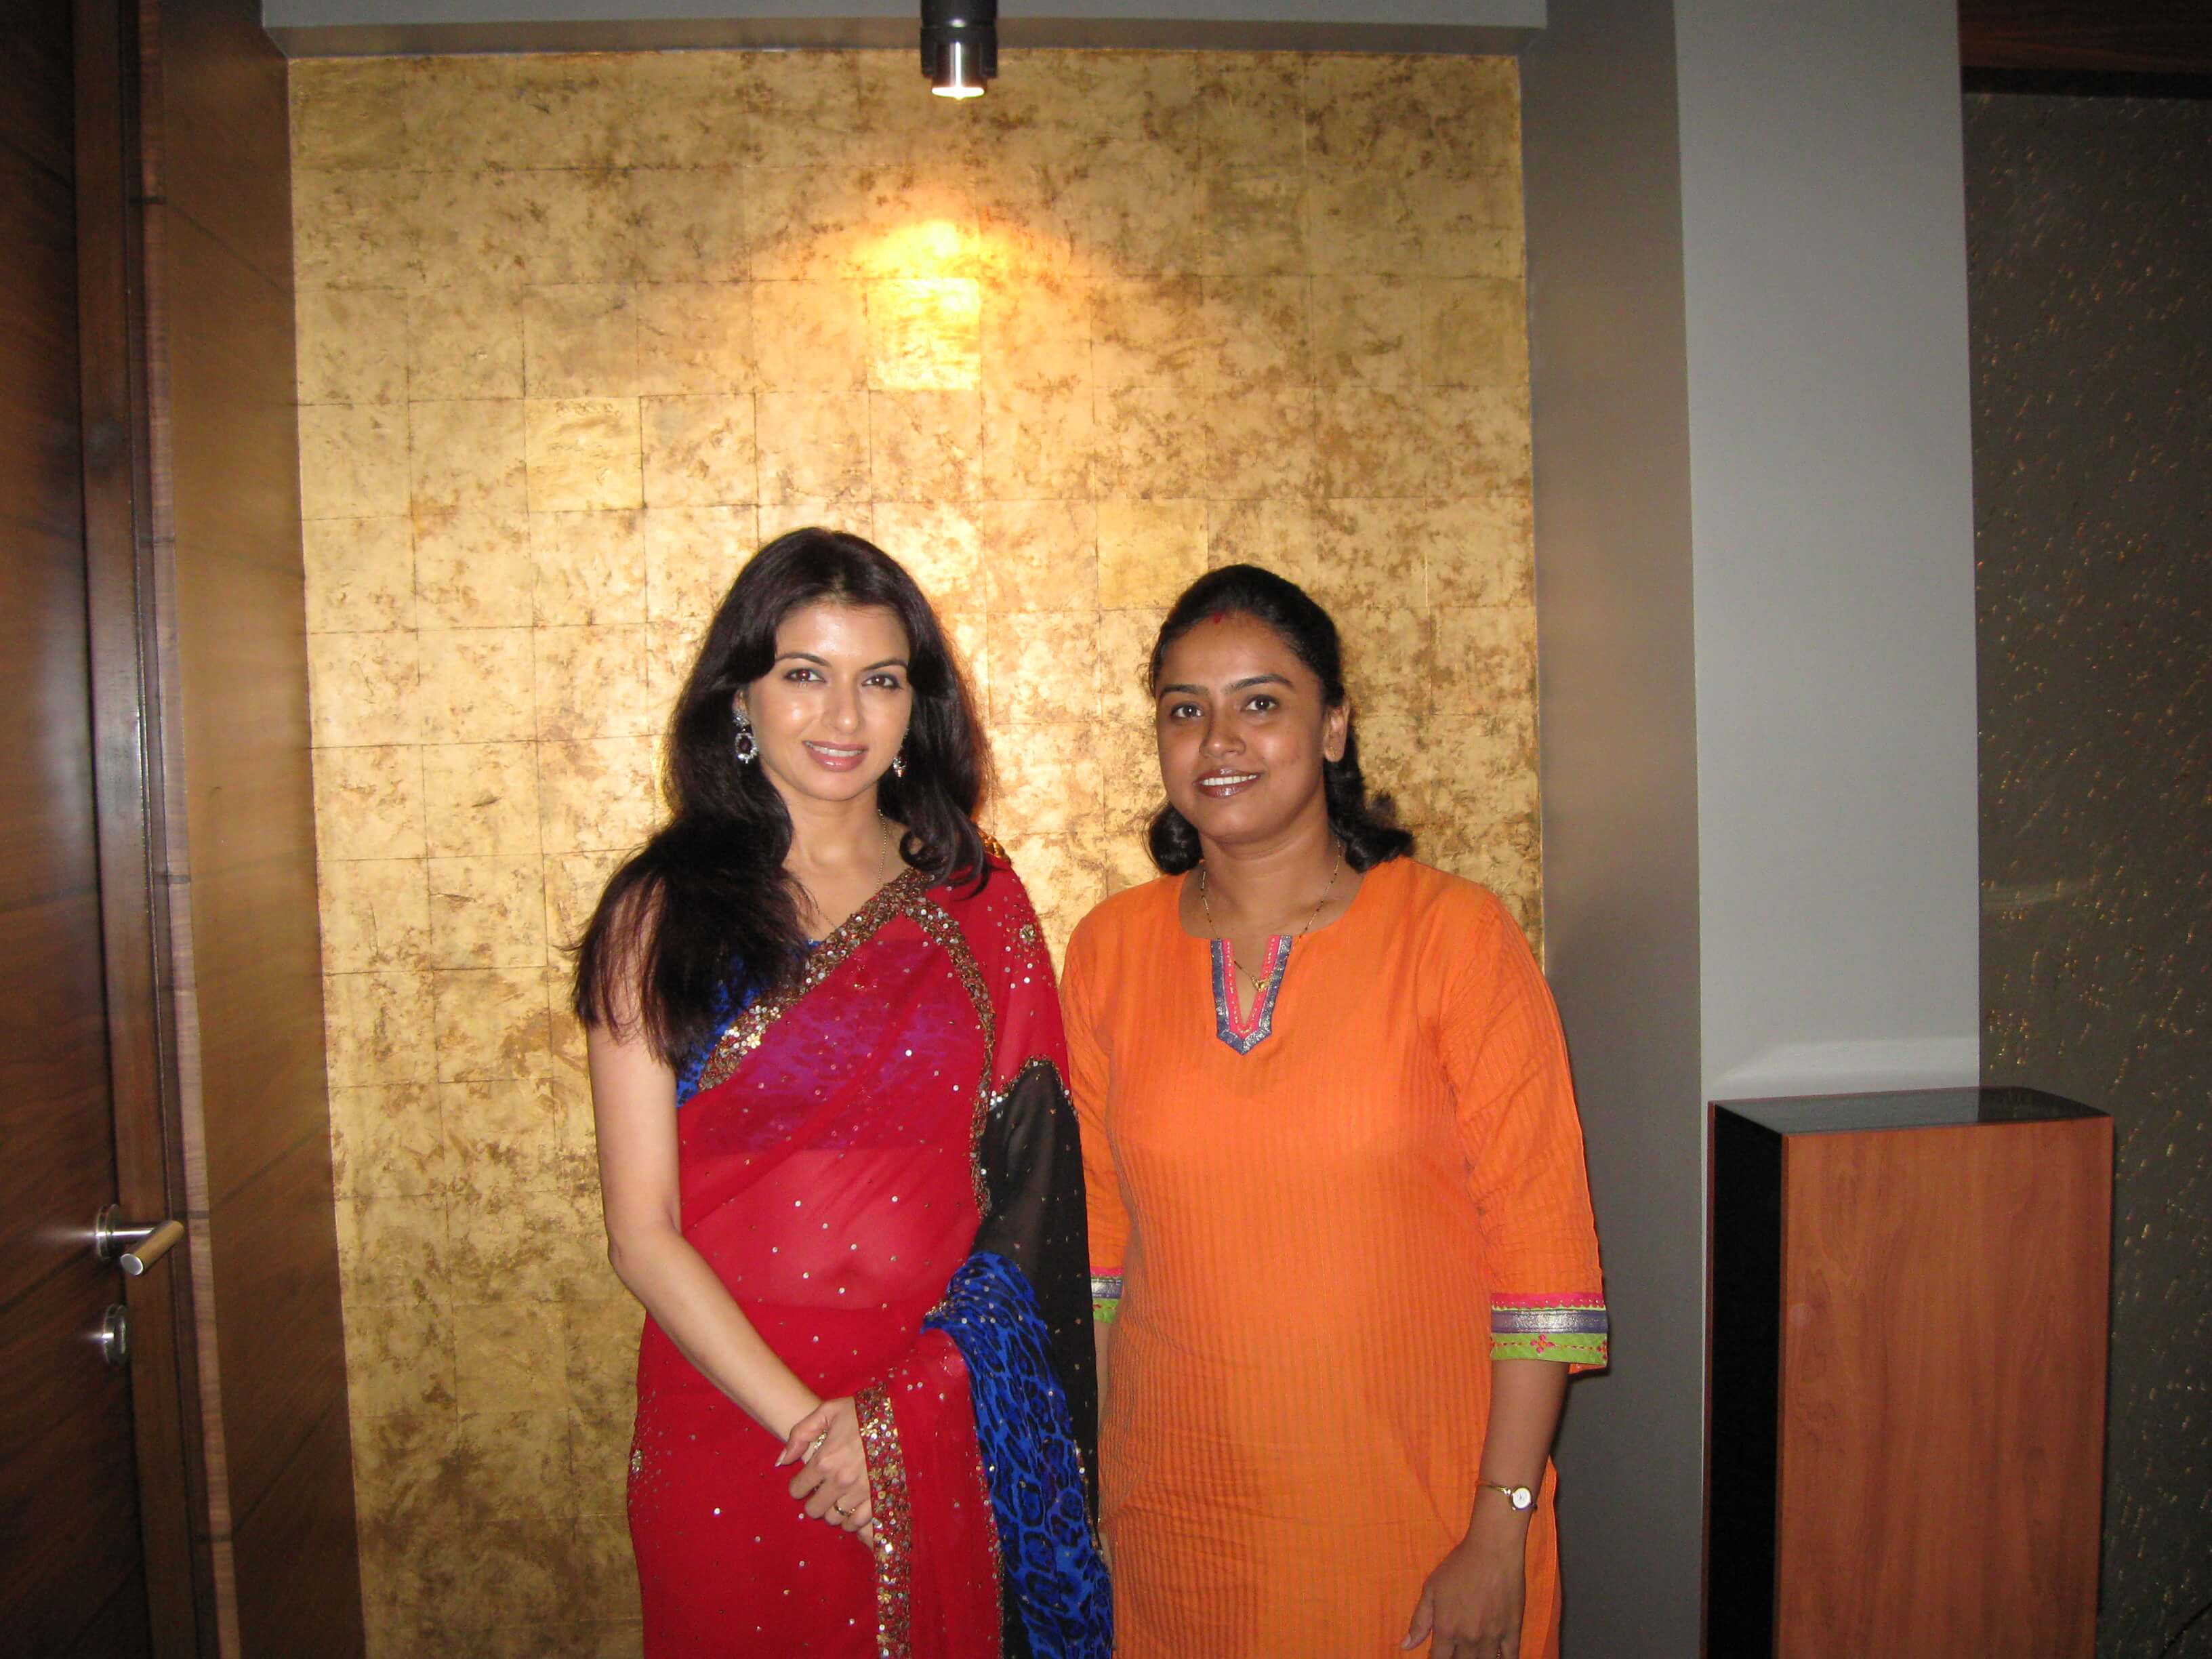 Our faculty Shilpa Ijeri with Bollywood Actress Bhagyashree Patwardhan, one of our students